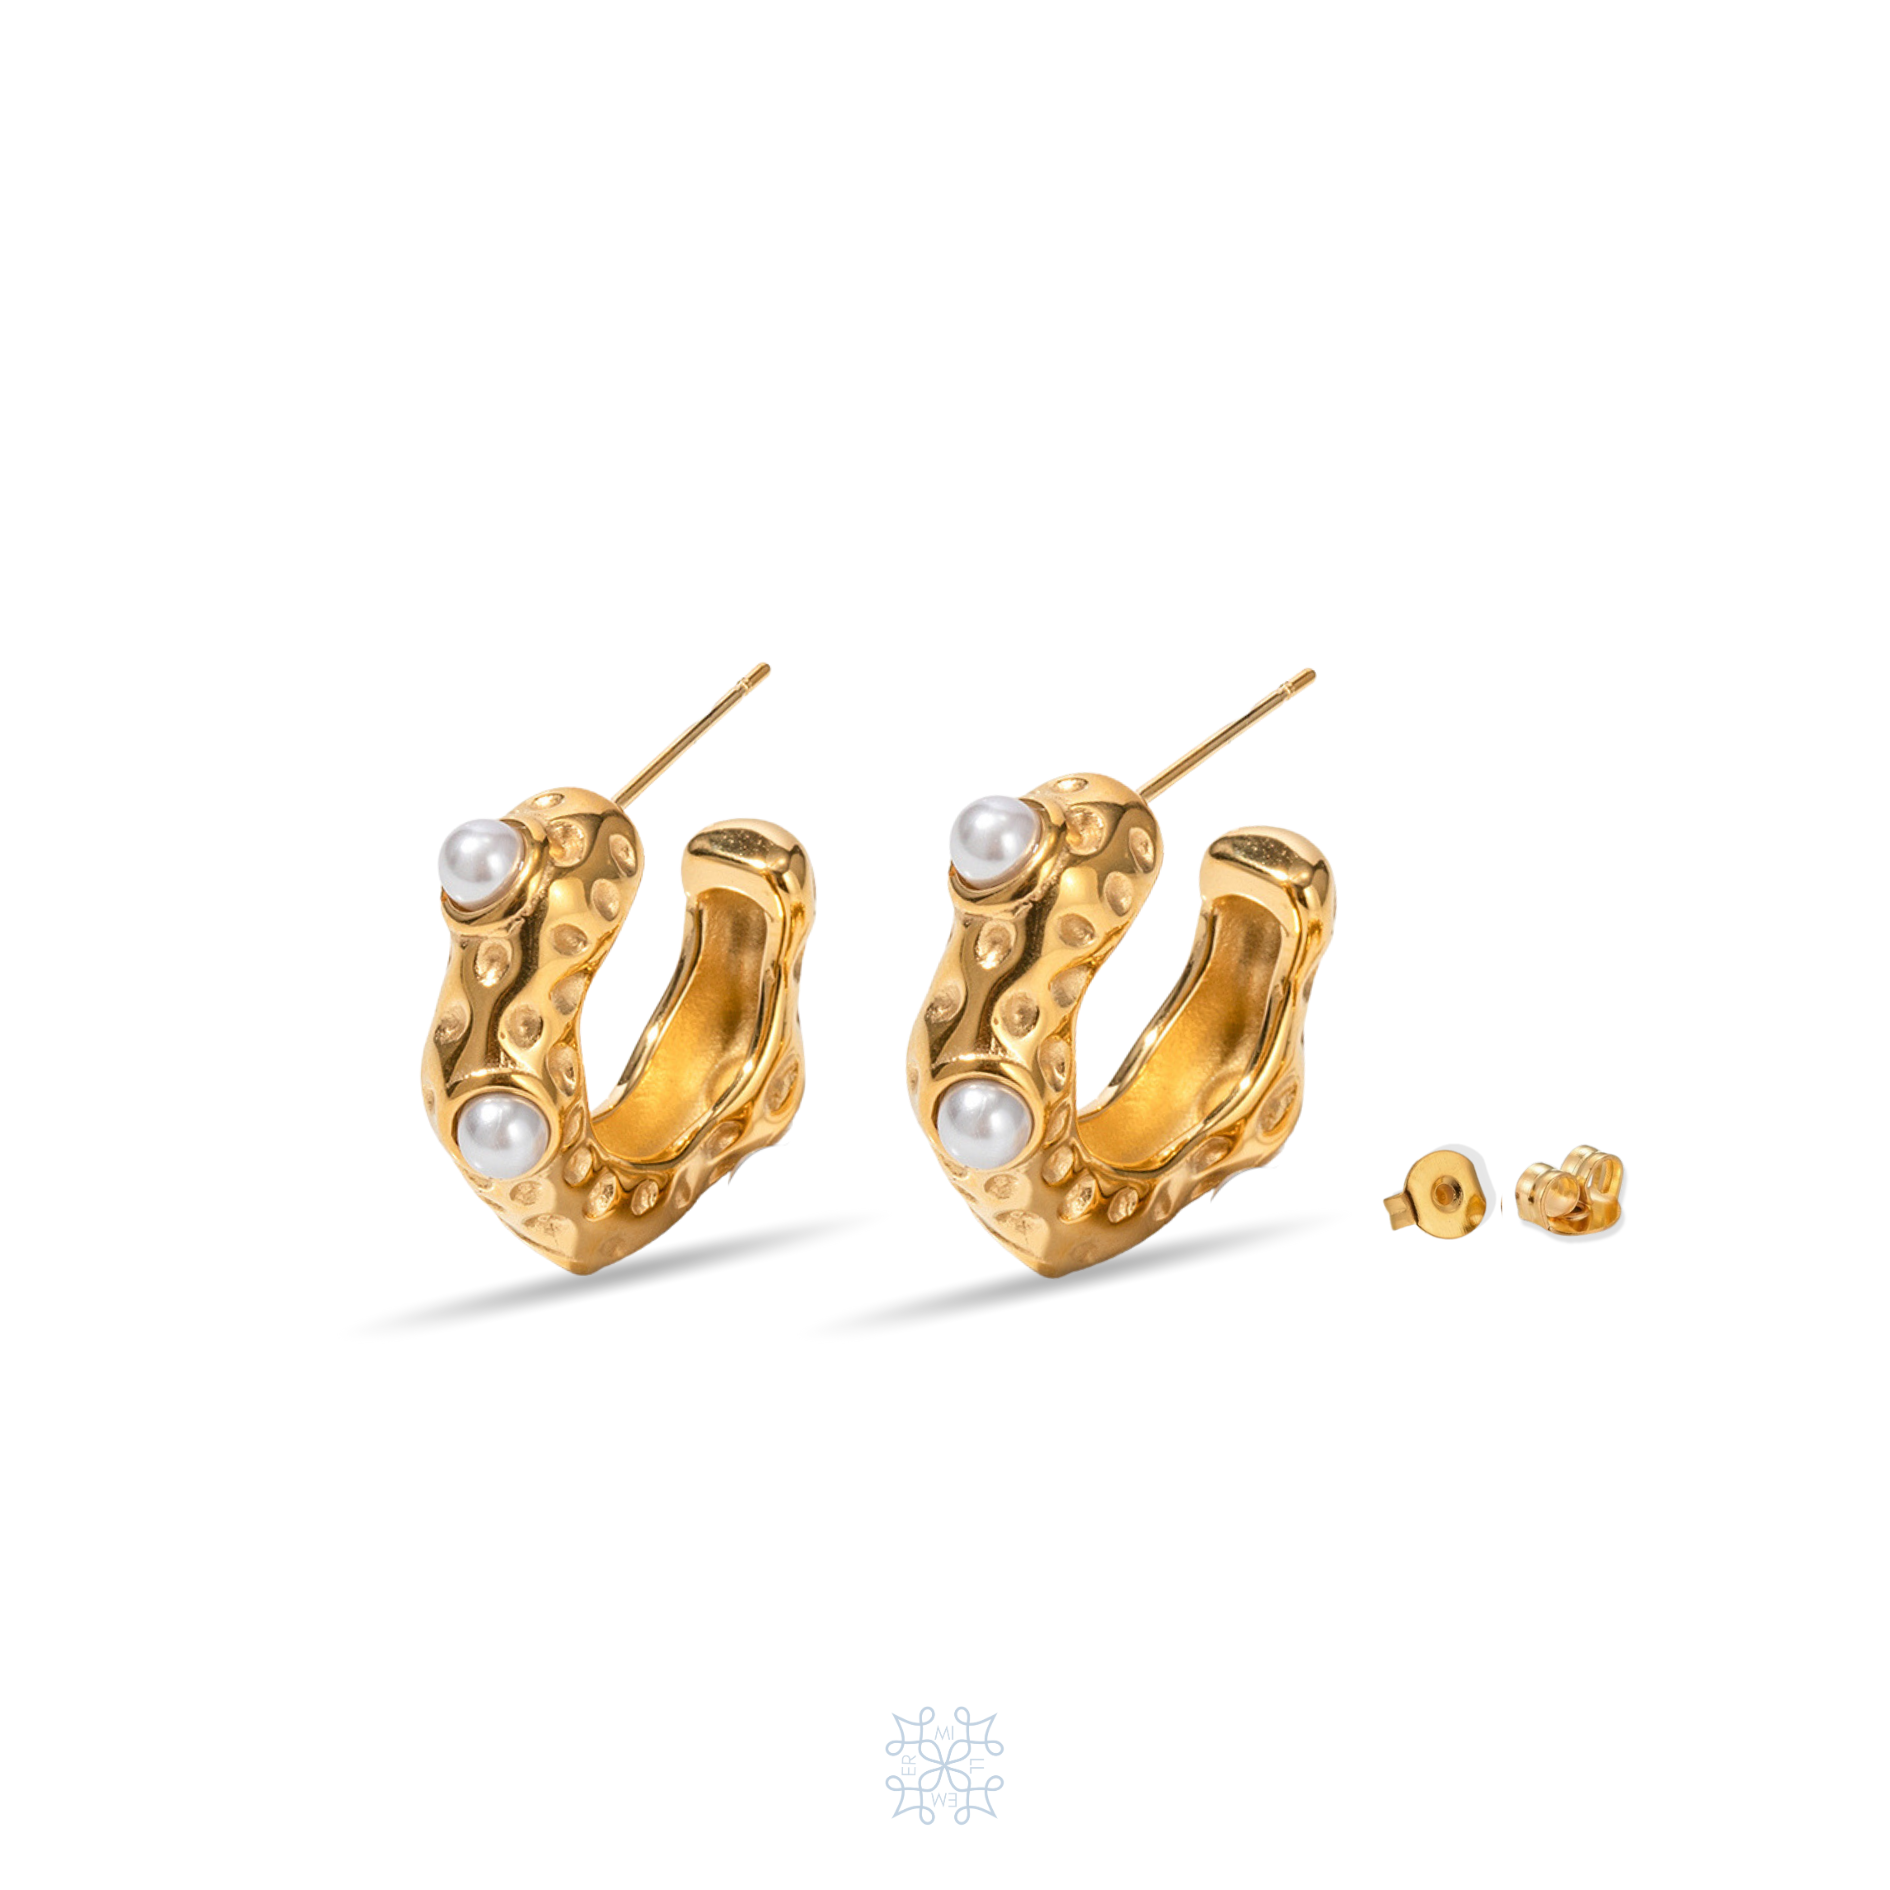 Gold Plated Half Hoop Earrings, Irregular shape resembling the water drops on a dune desert surface, white pearls added in every earring. 